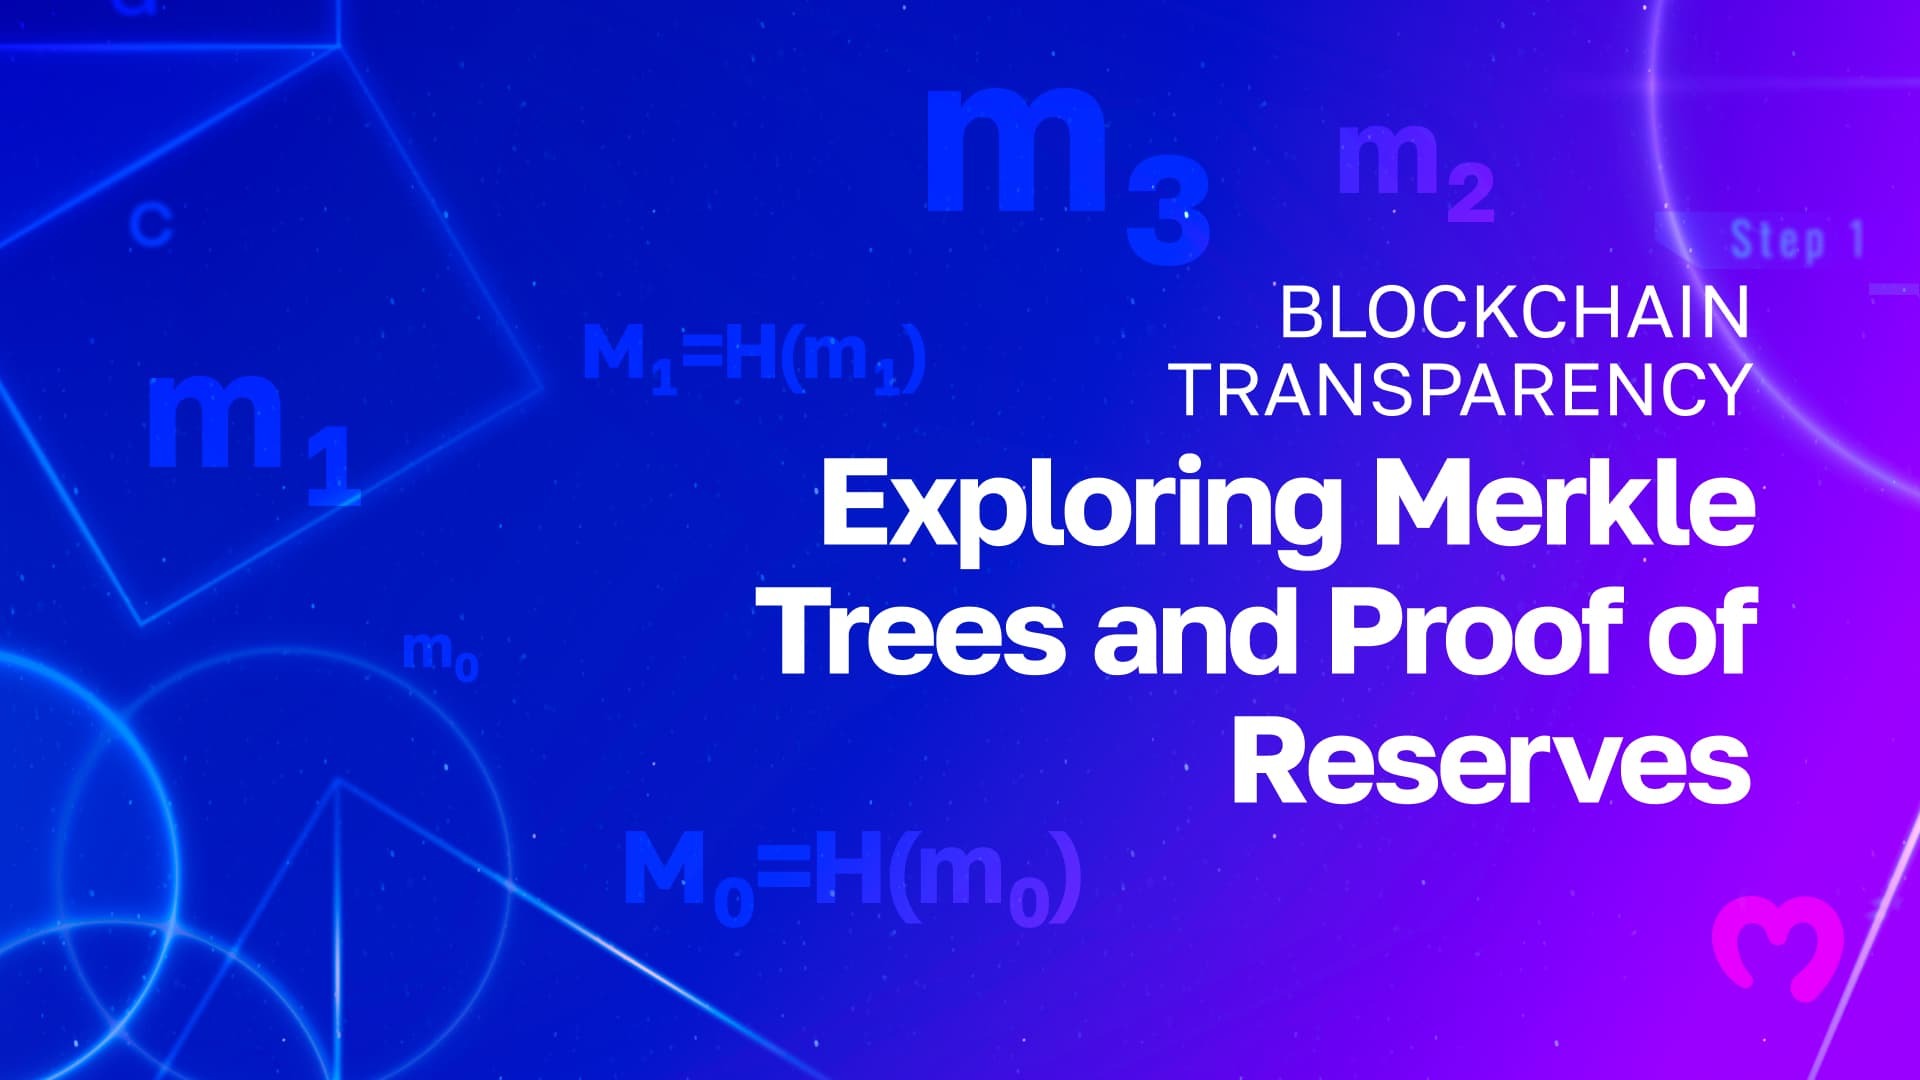 22_12_Blockchain-Transparency--Exploring-Merkle-Trees-and-Proof-of-Reserves